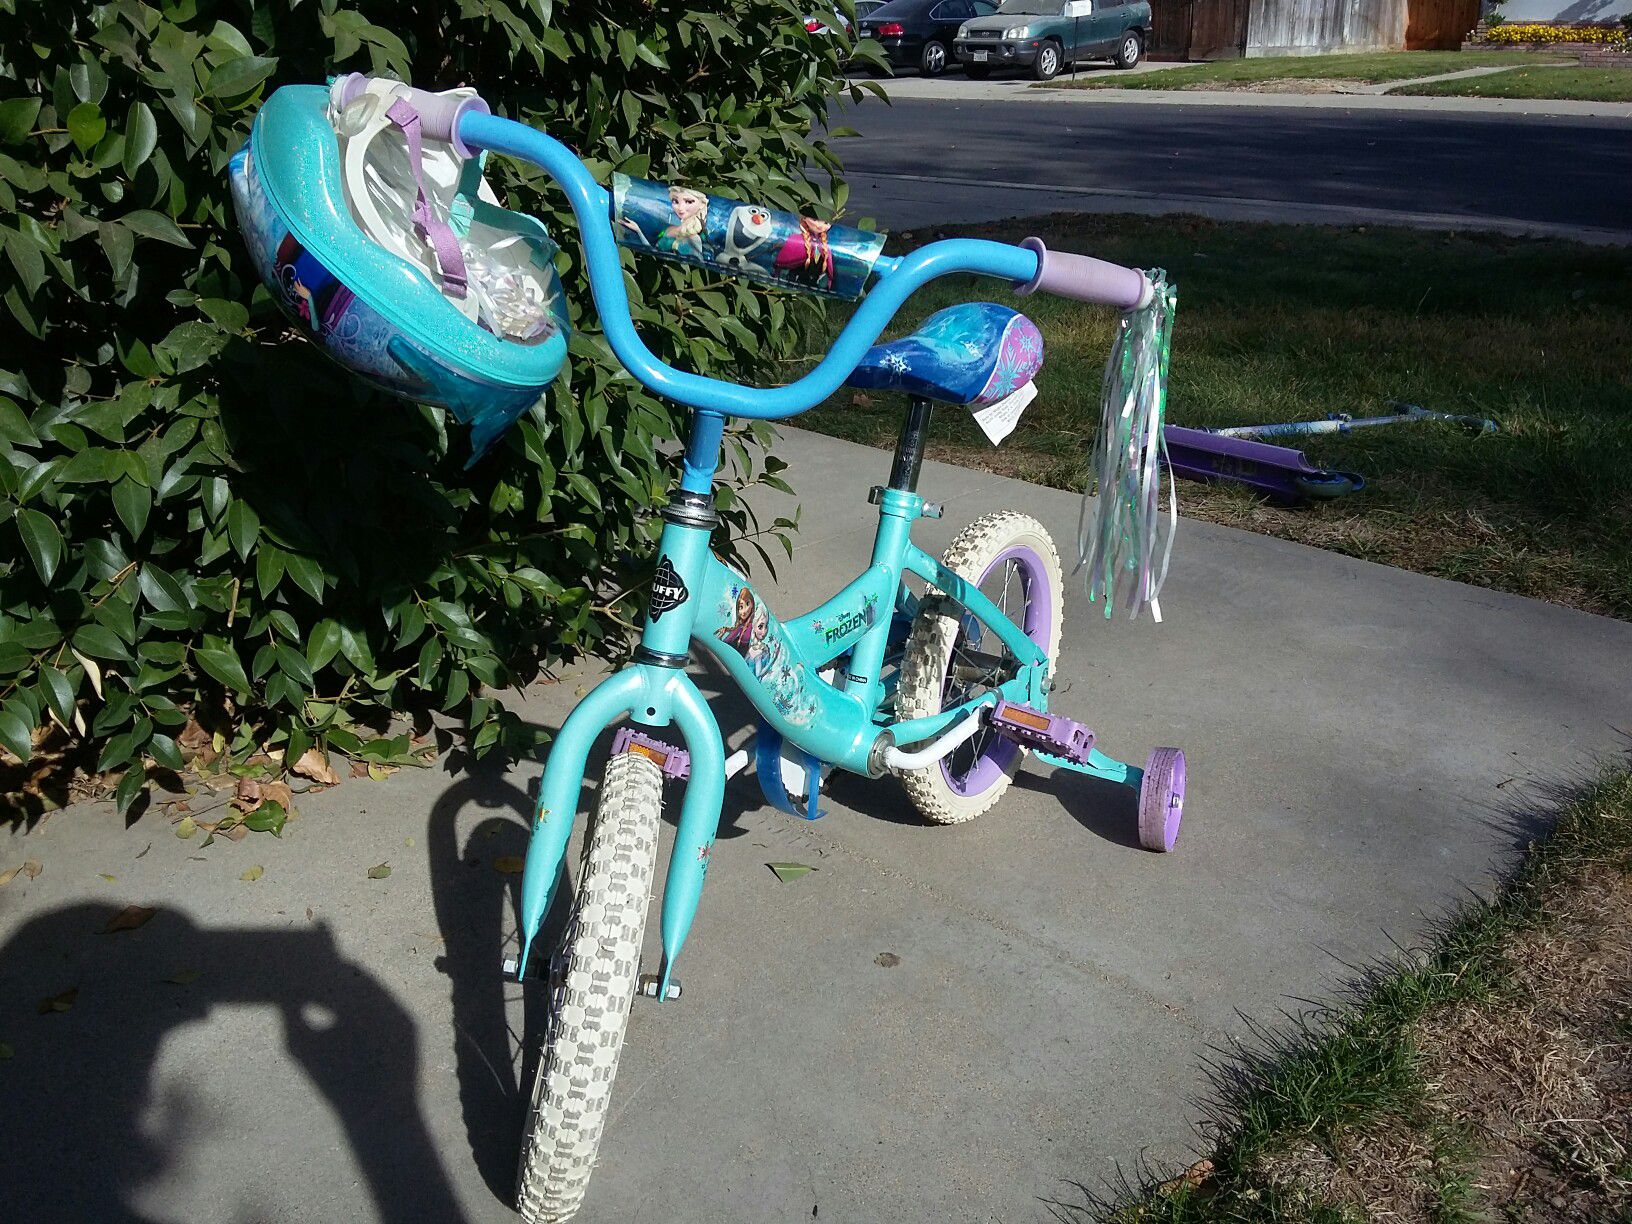 Disney's Frozen bike and scooter